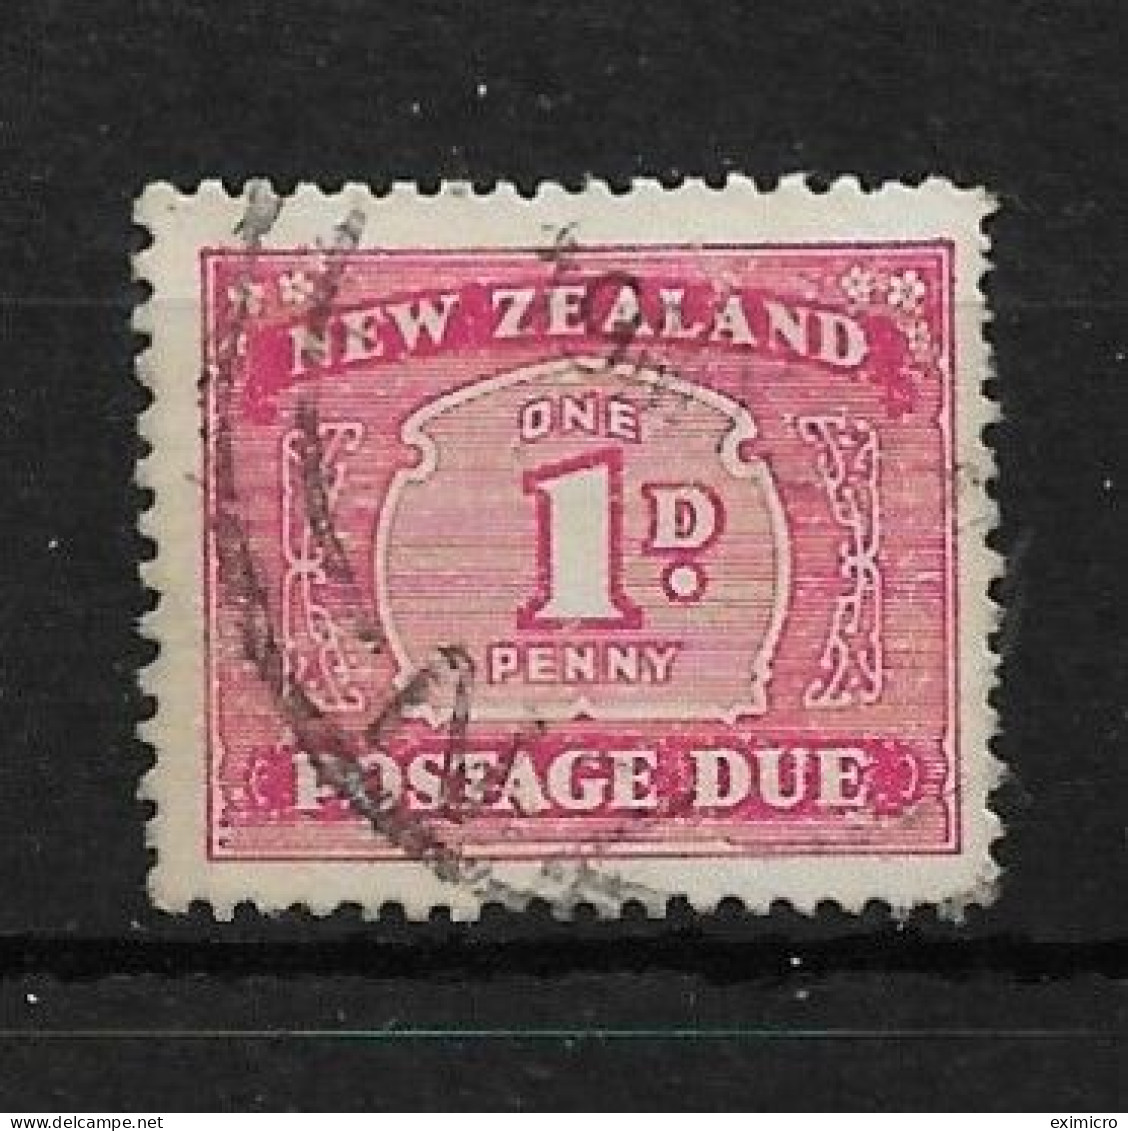 NEW ZEALAND 1939 1d POSTAGE DUE SG D42 FINE USED Cat £2.50 - Timbres-taxe